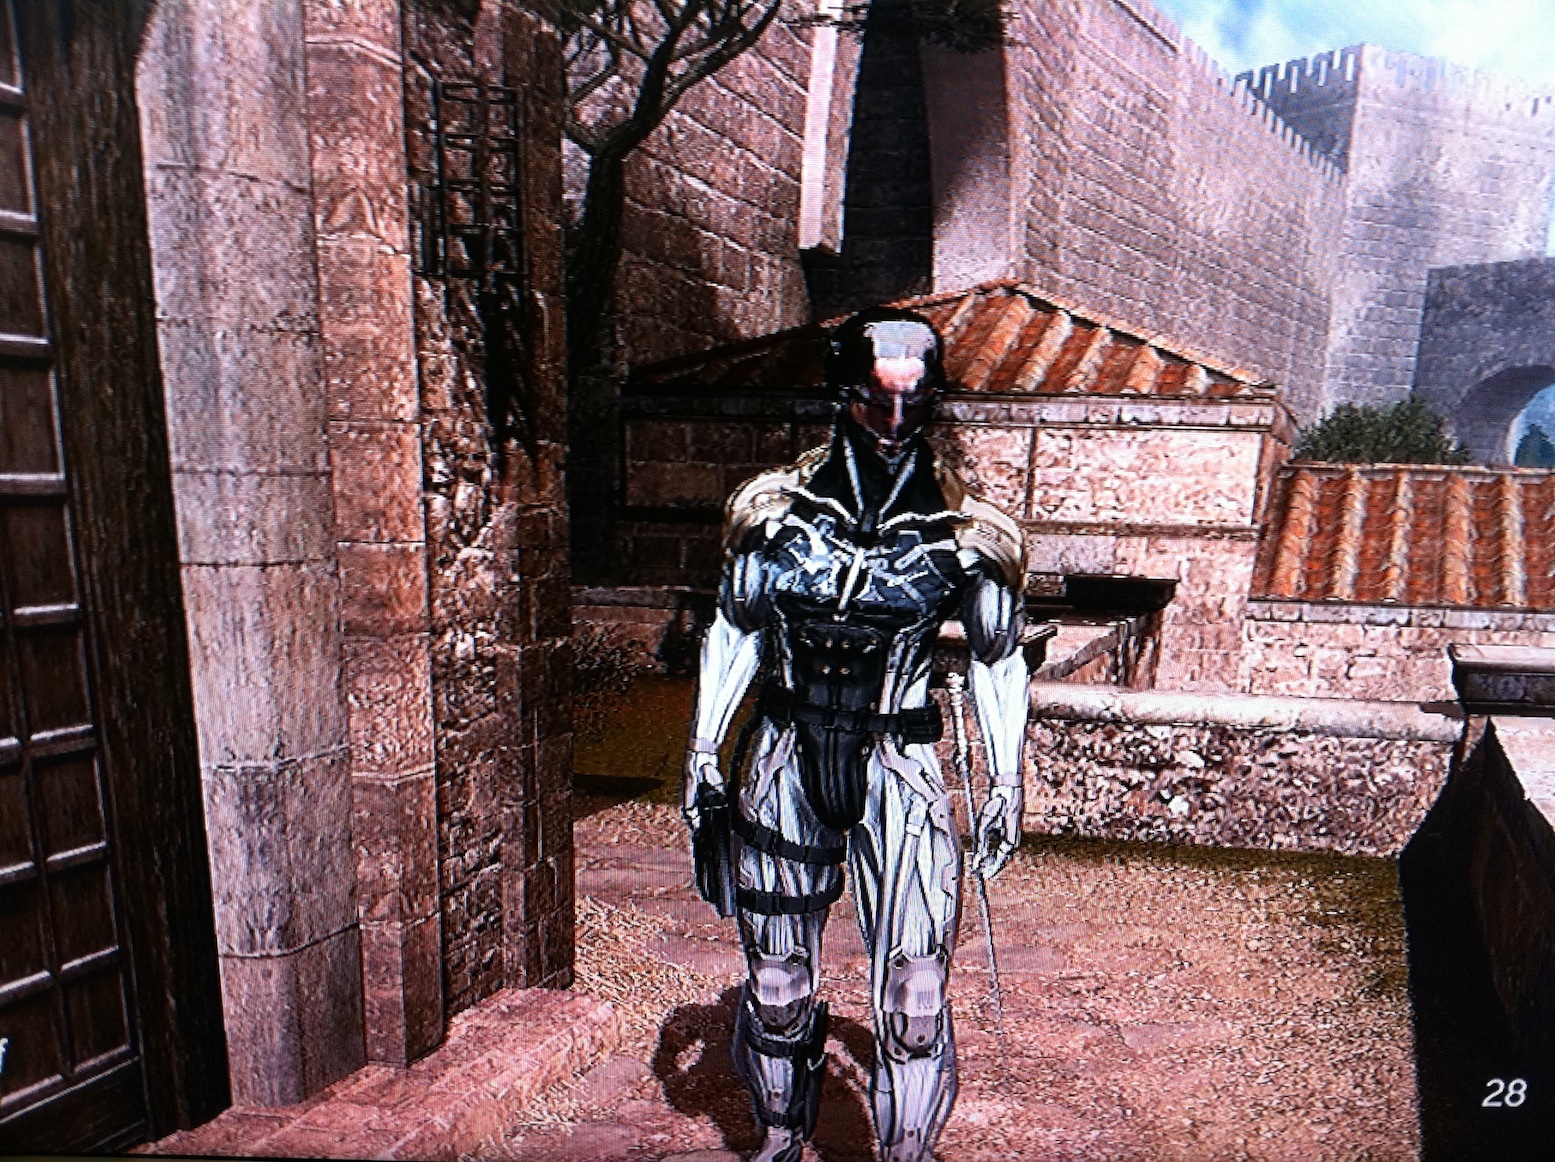 The unlockable Raiden skin featured in-game for Assassin's Creed: Brotherhood.